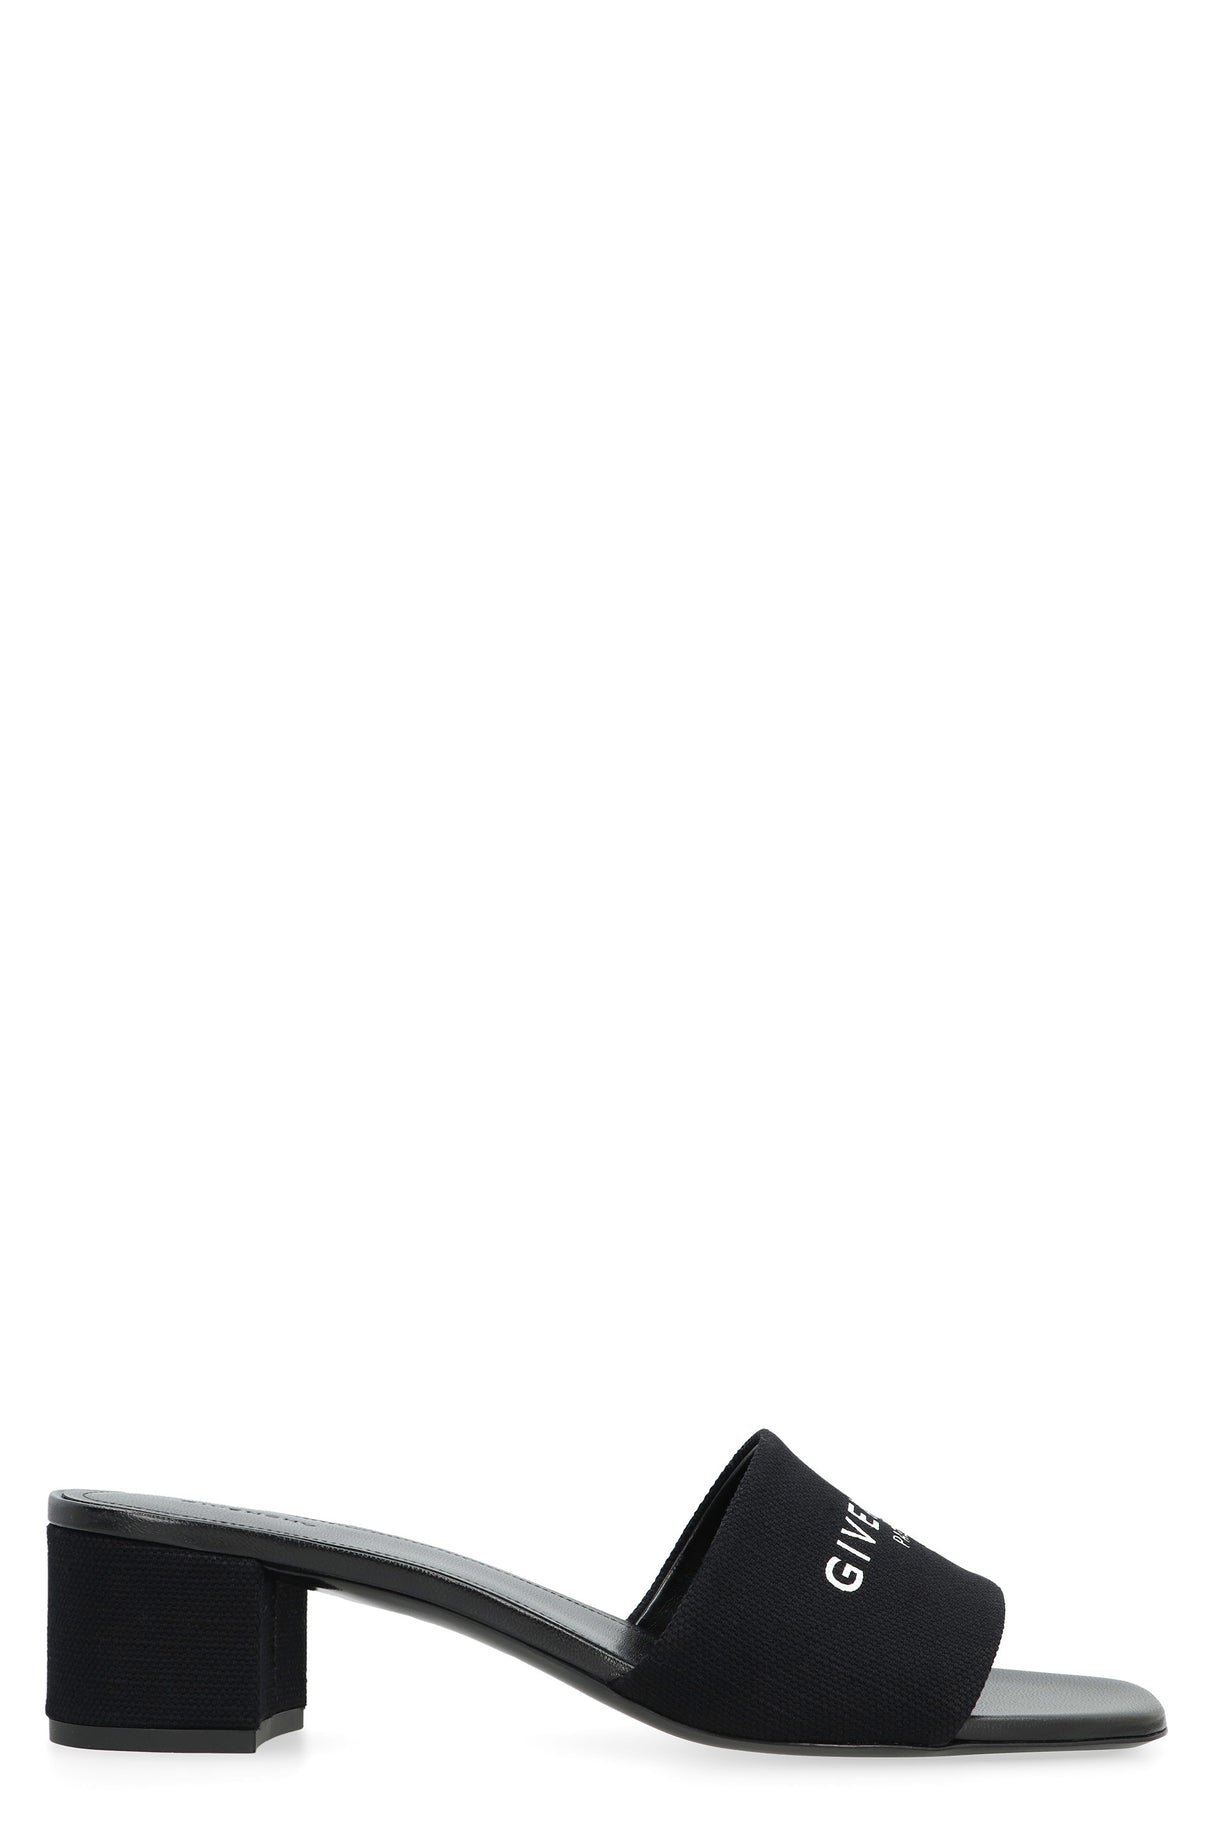 GIVENCHY Black 4G Fabric Sandals for Women